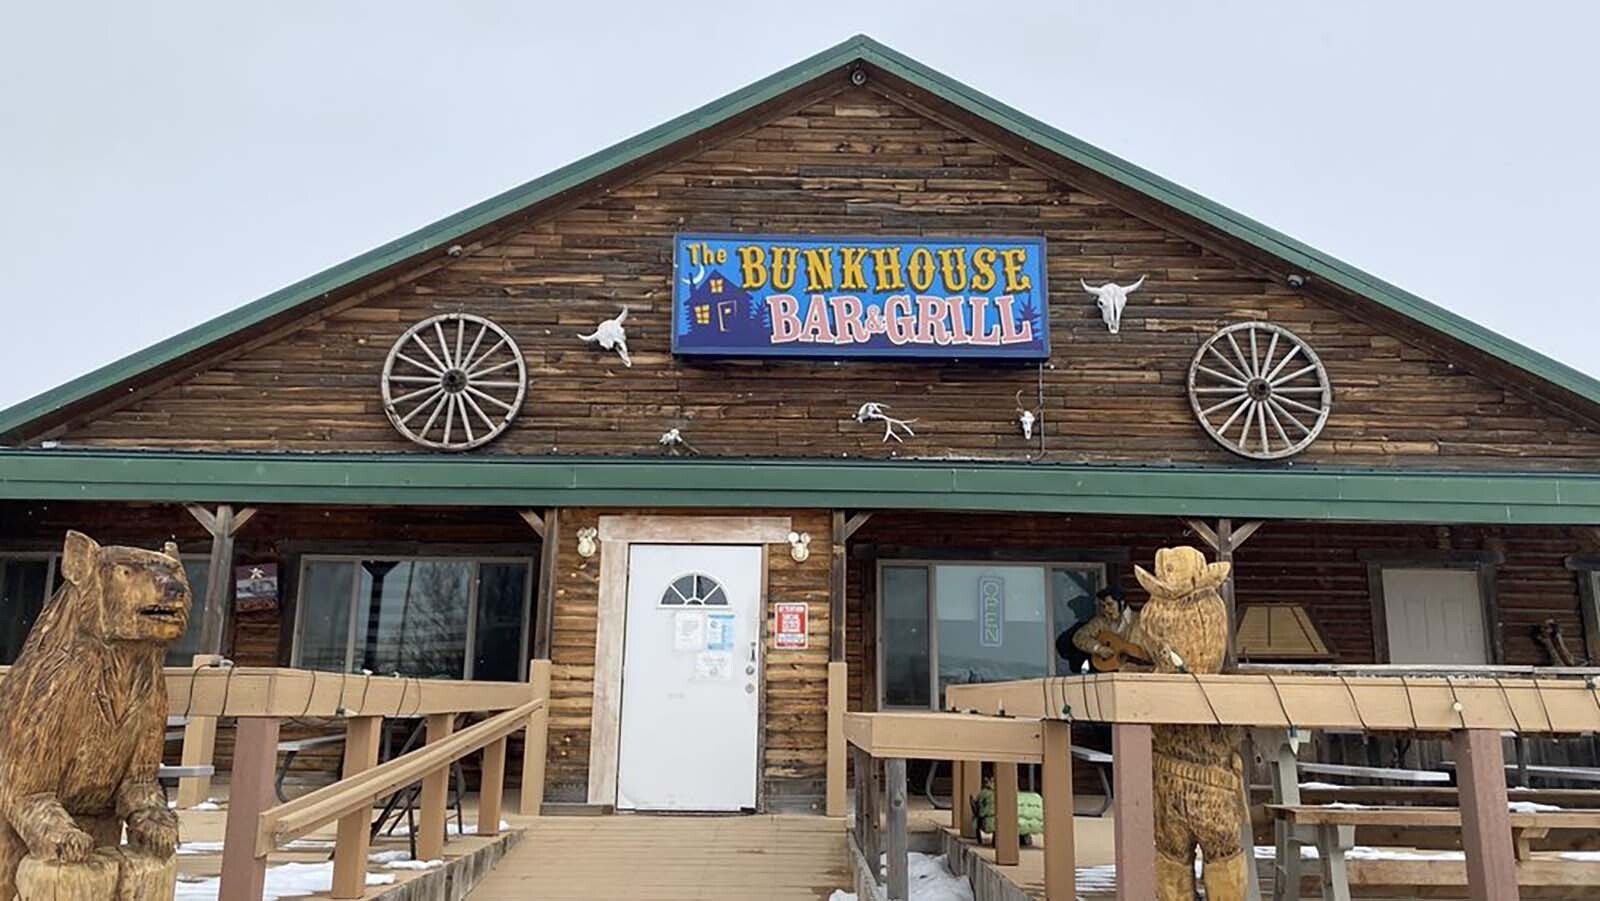 The Bunkhouse Bar and Grill, along with a pair of bears and Elvis manning the entrance.